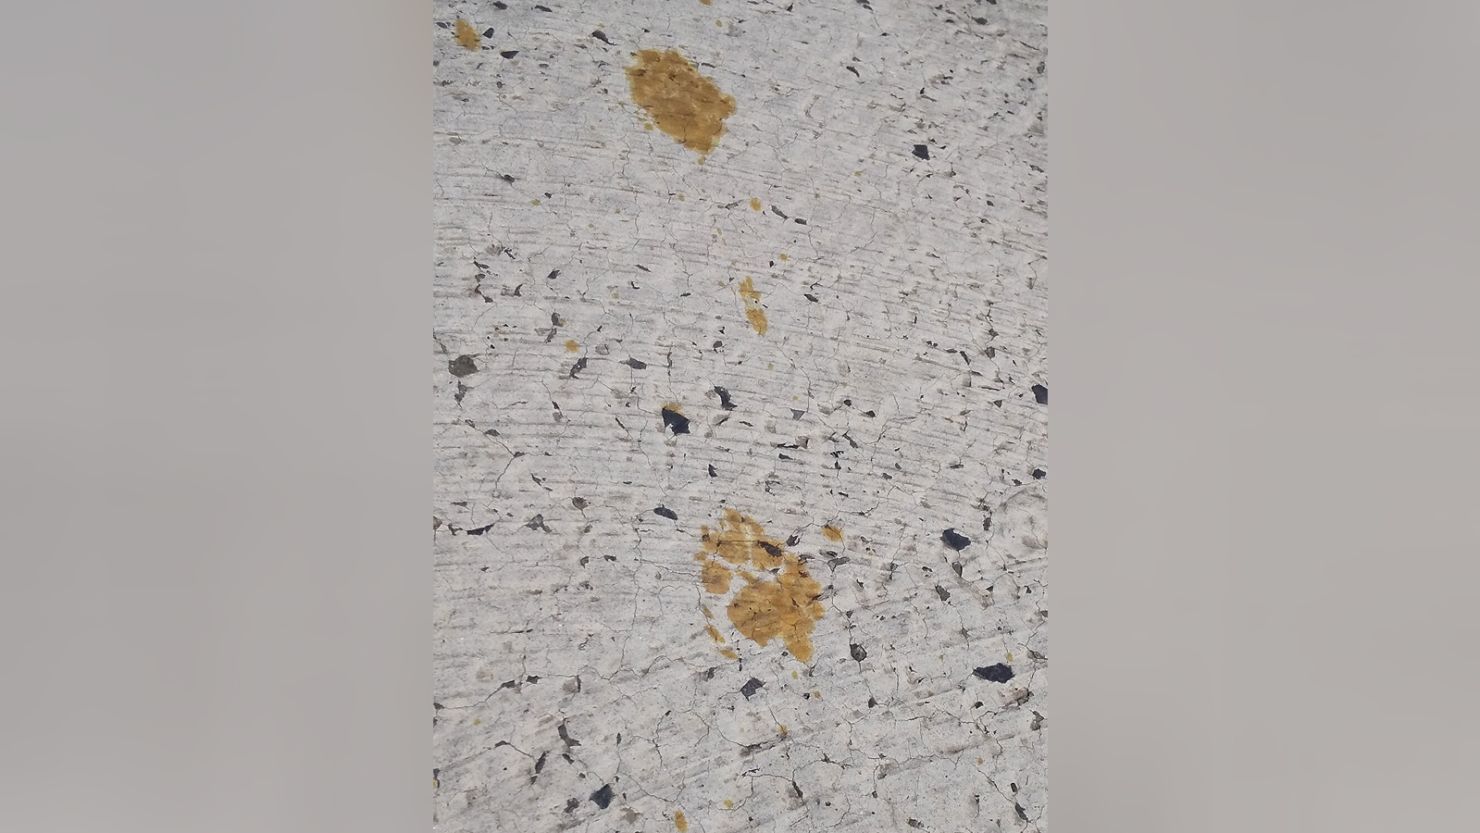 Footprints believed to be from a cat that fell into a tank containing toxic hexavalent chromium at the plating factory in Fukuyama, Hiroshima prefecture.